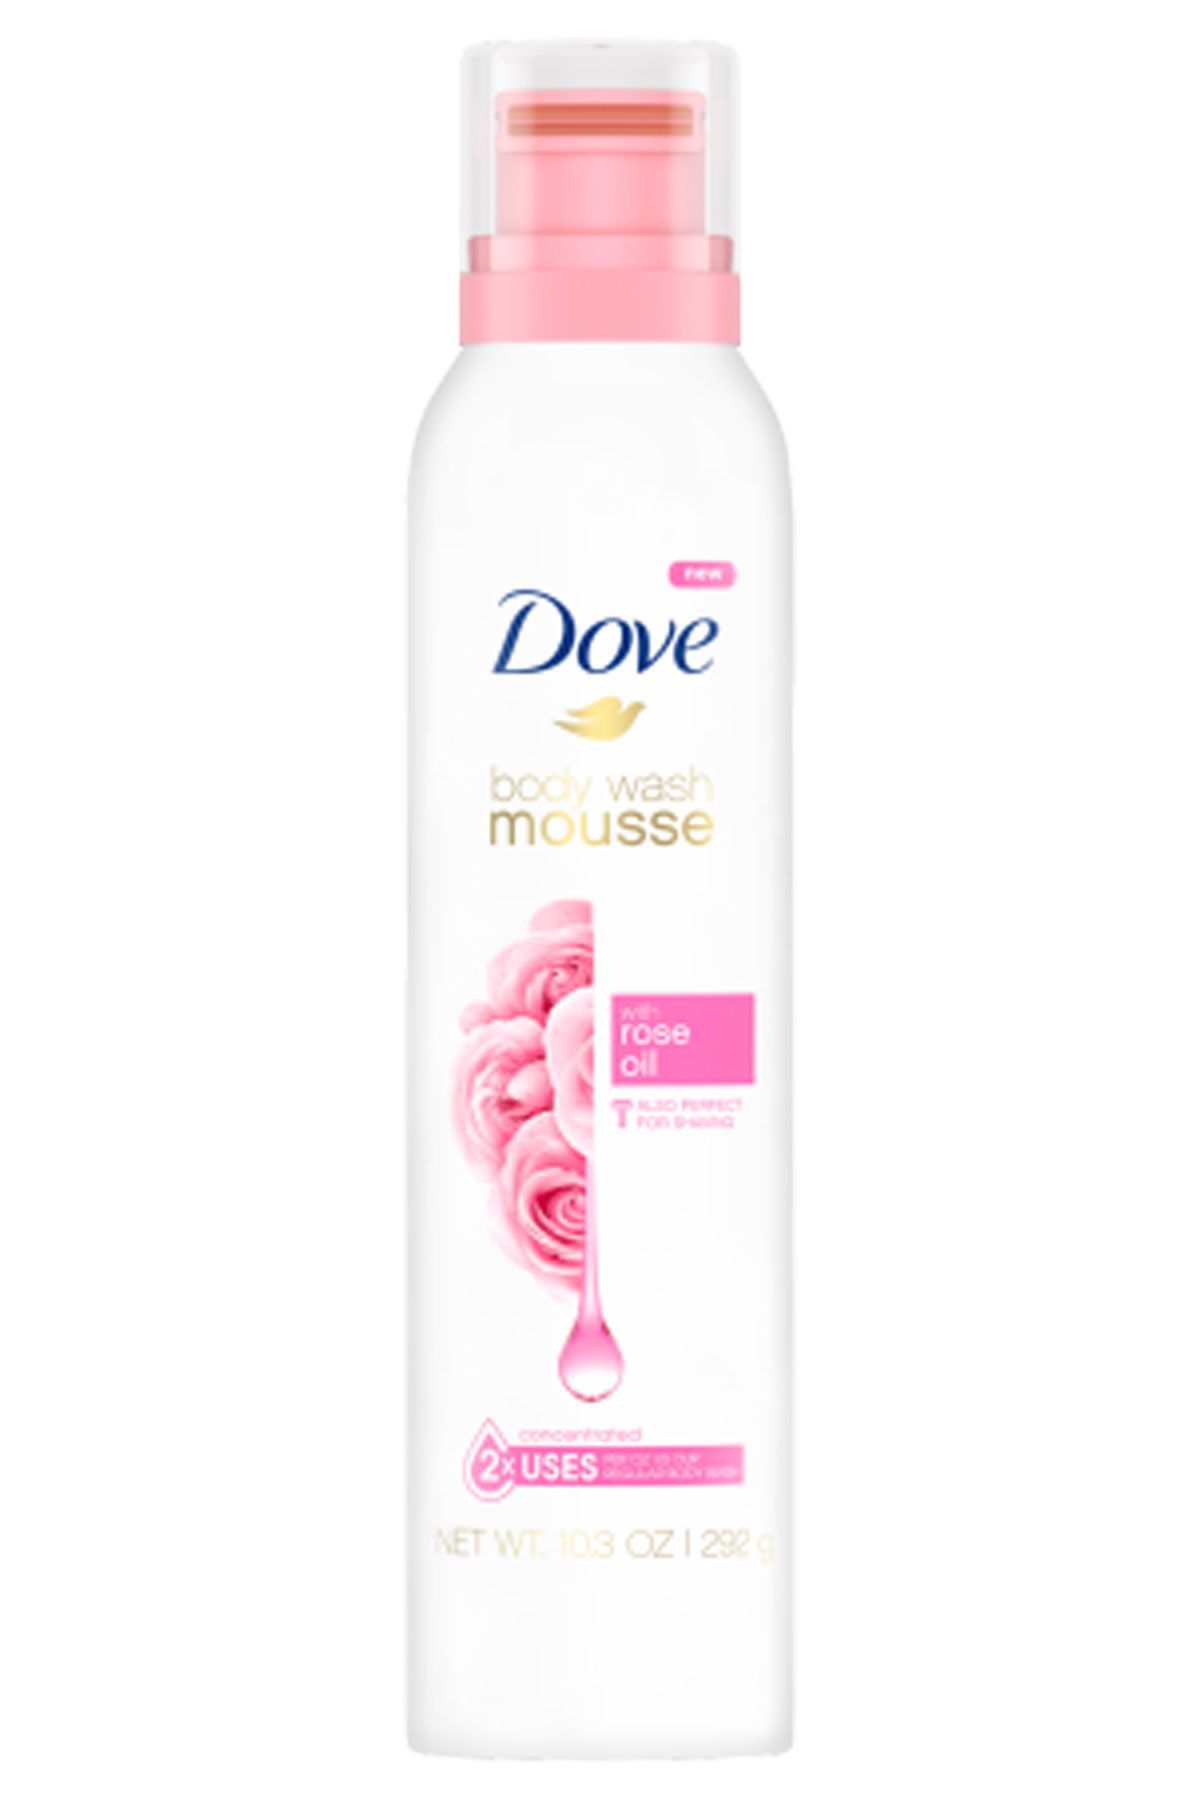 Dove Body Wash Mousse with Rose Oil